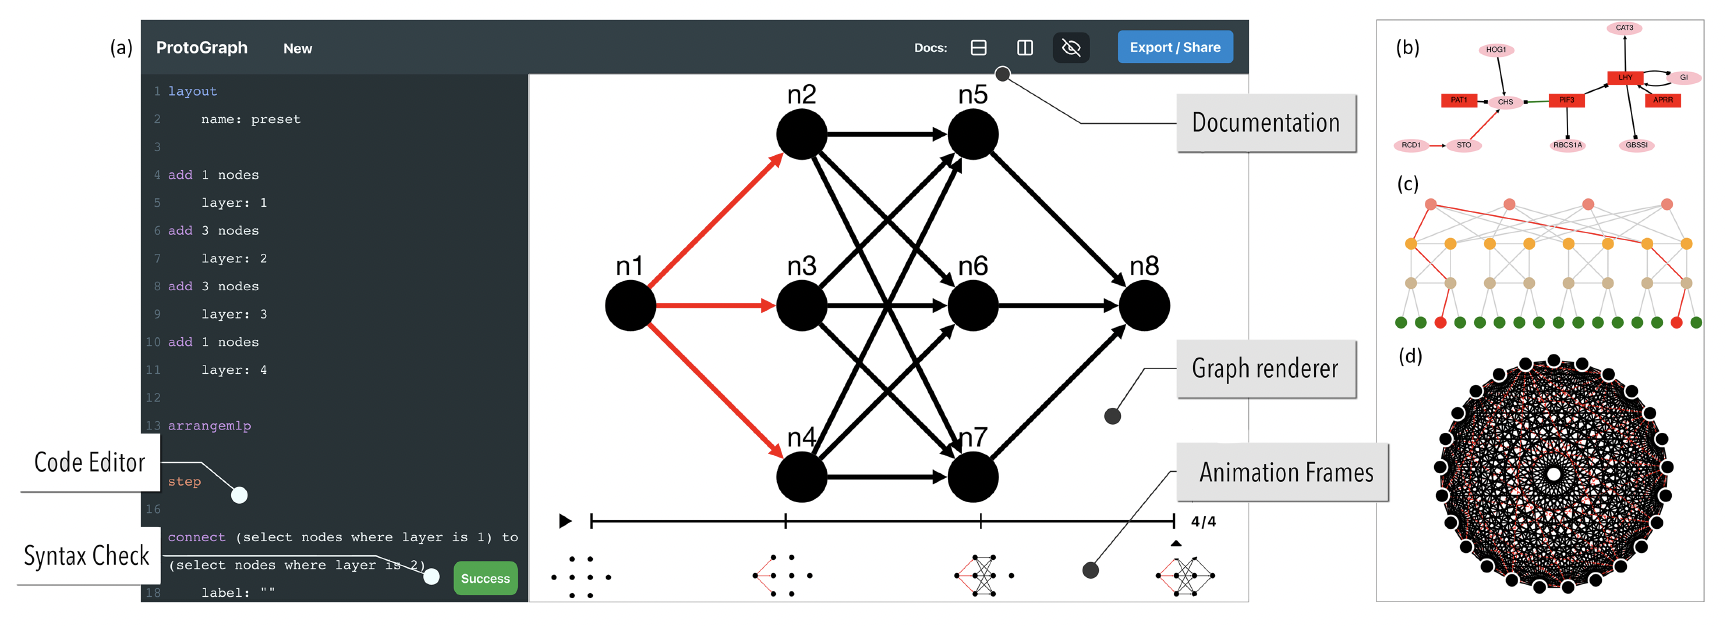 ProtoGraph: A Non-Expert Toolkit for Creating Animated Graphs